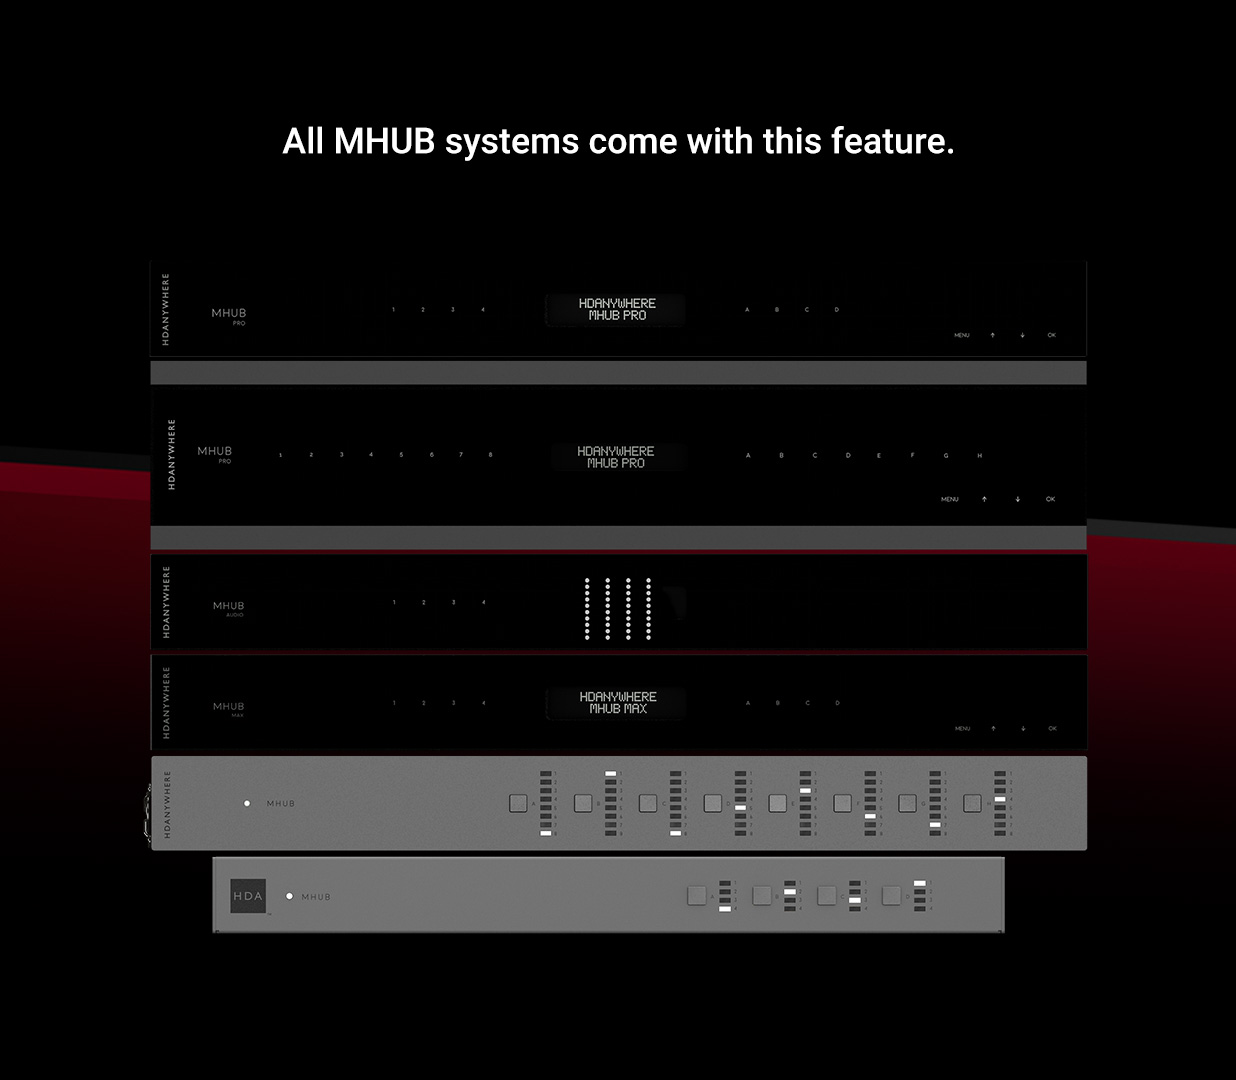 Available on all MHUB systems